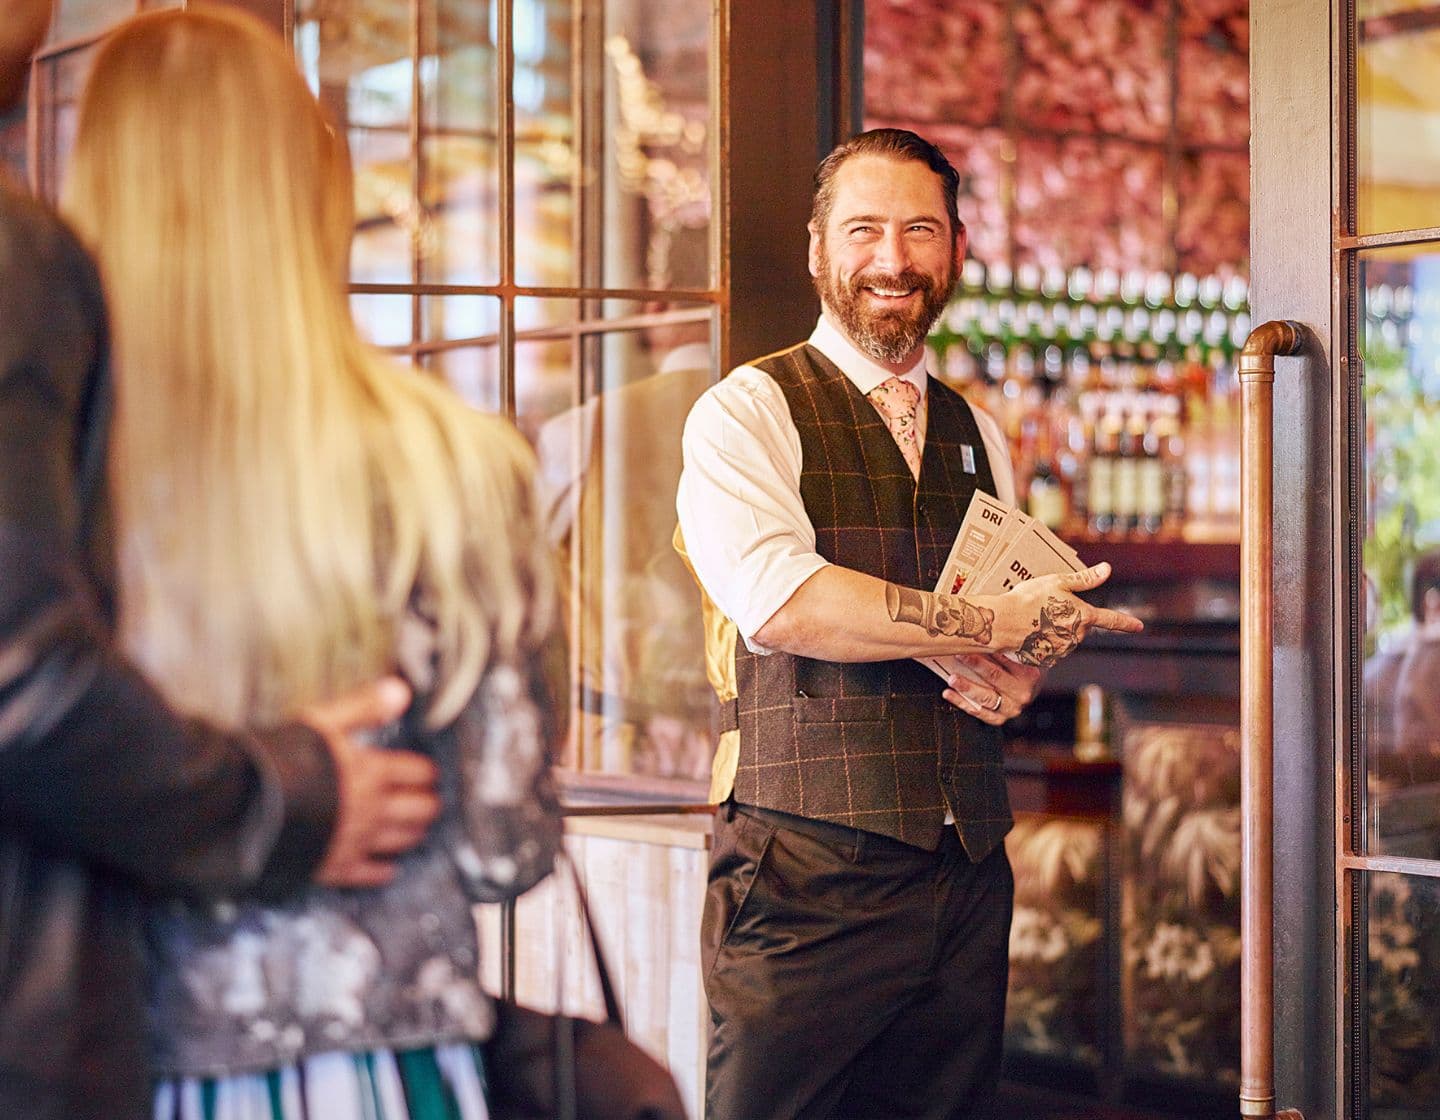 Host greeting guests at the door with menus.